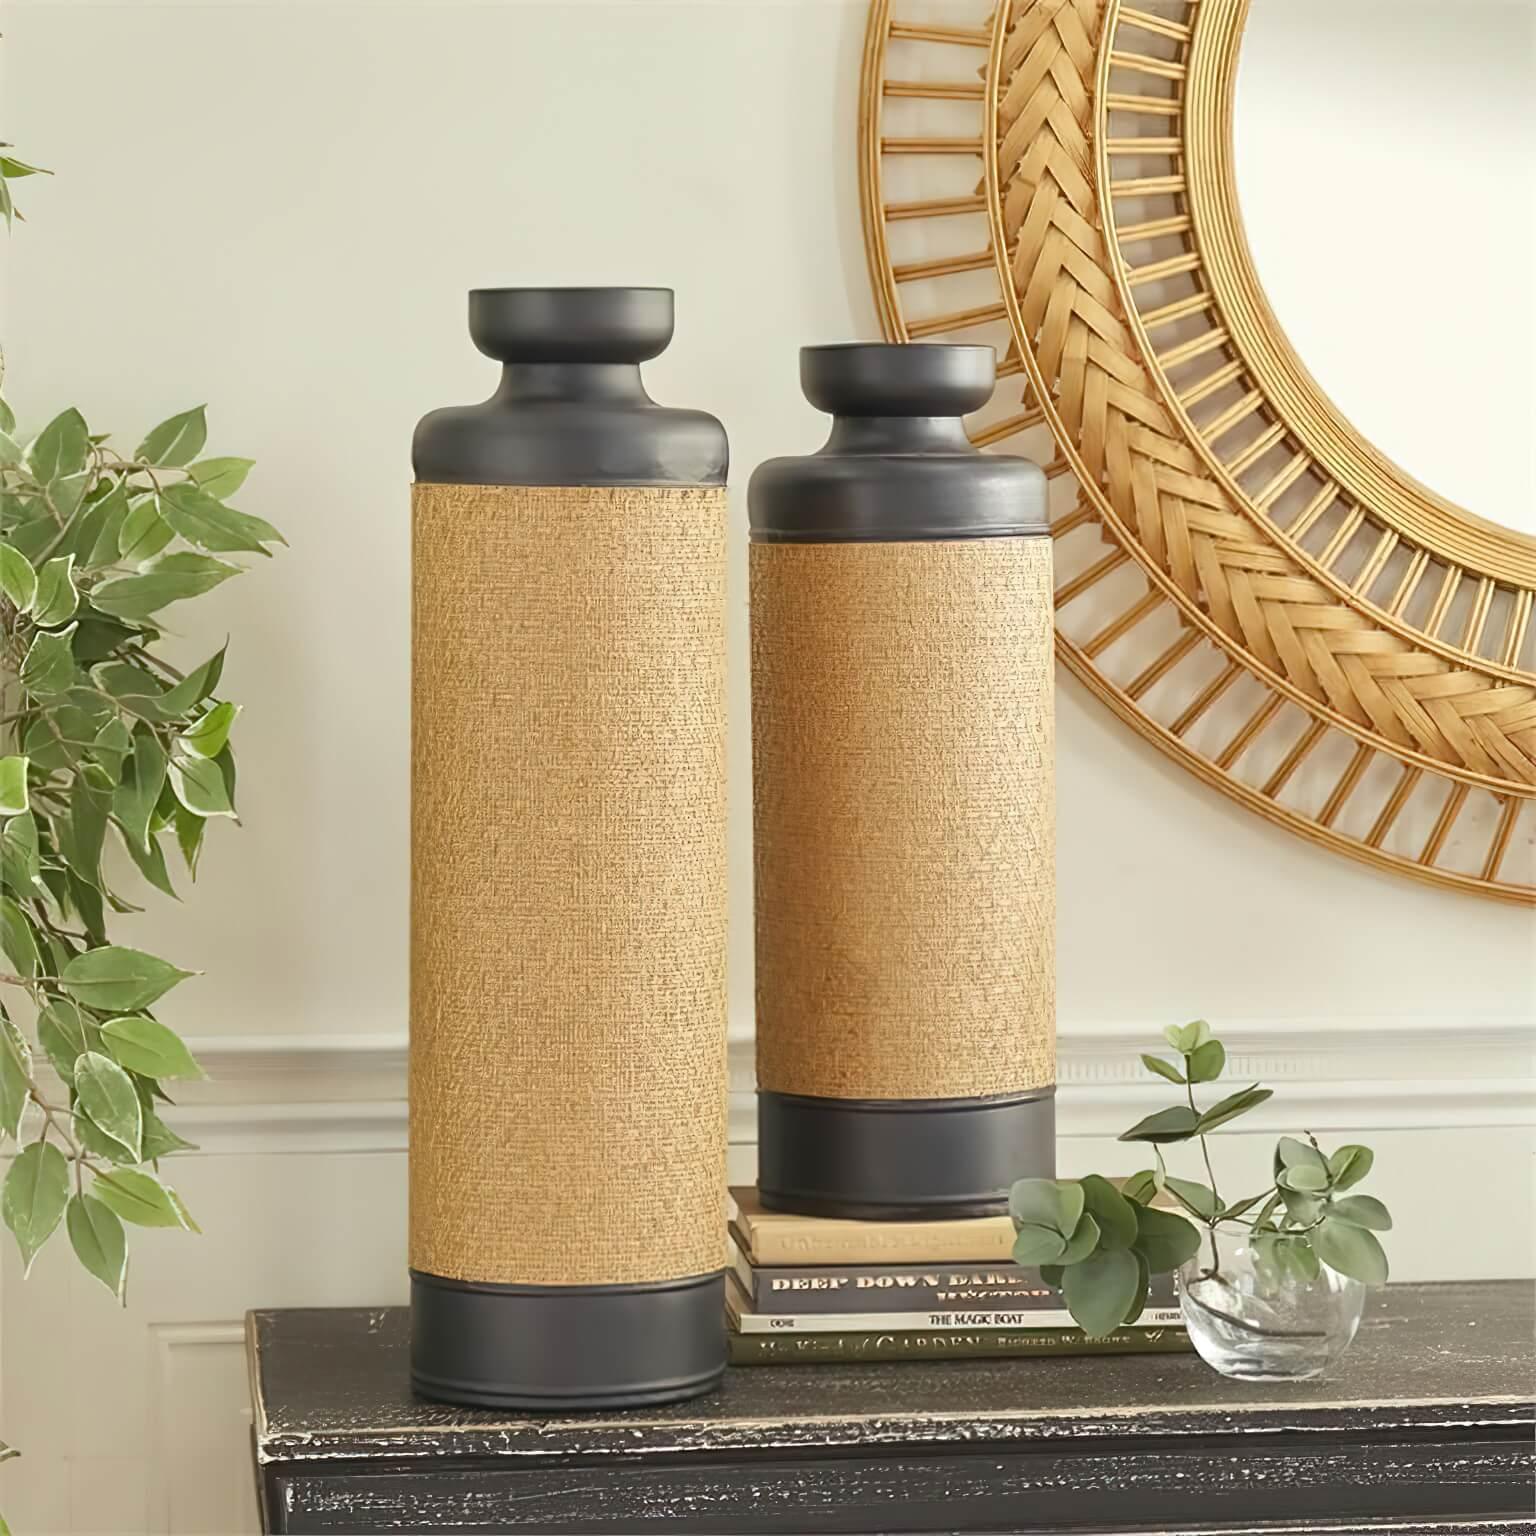 Oversized and Tall Black Vases Elevate Home Decor - Vases